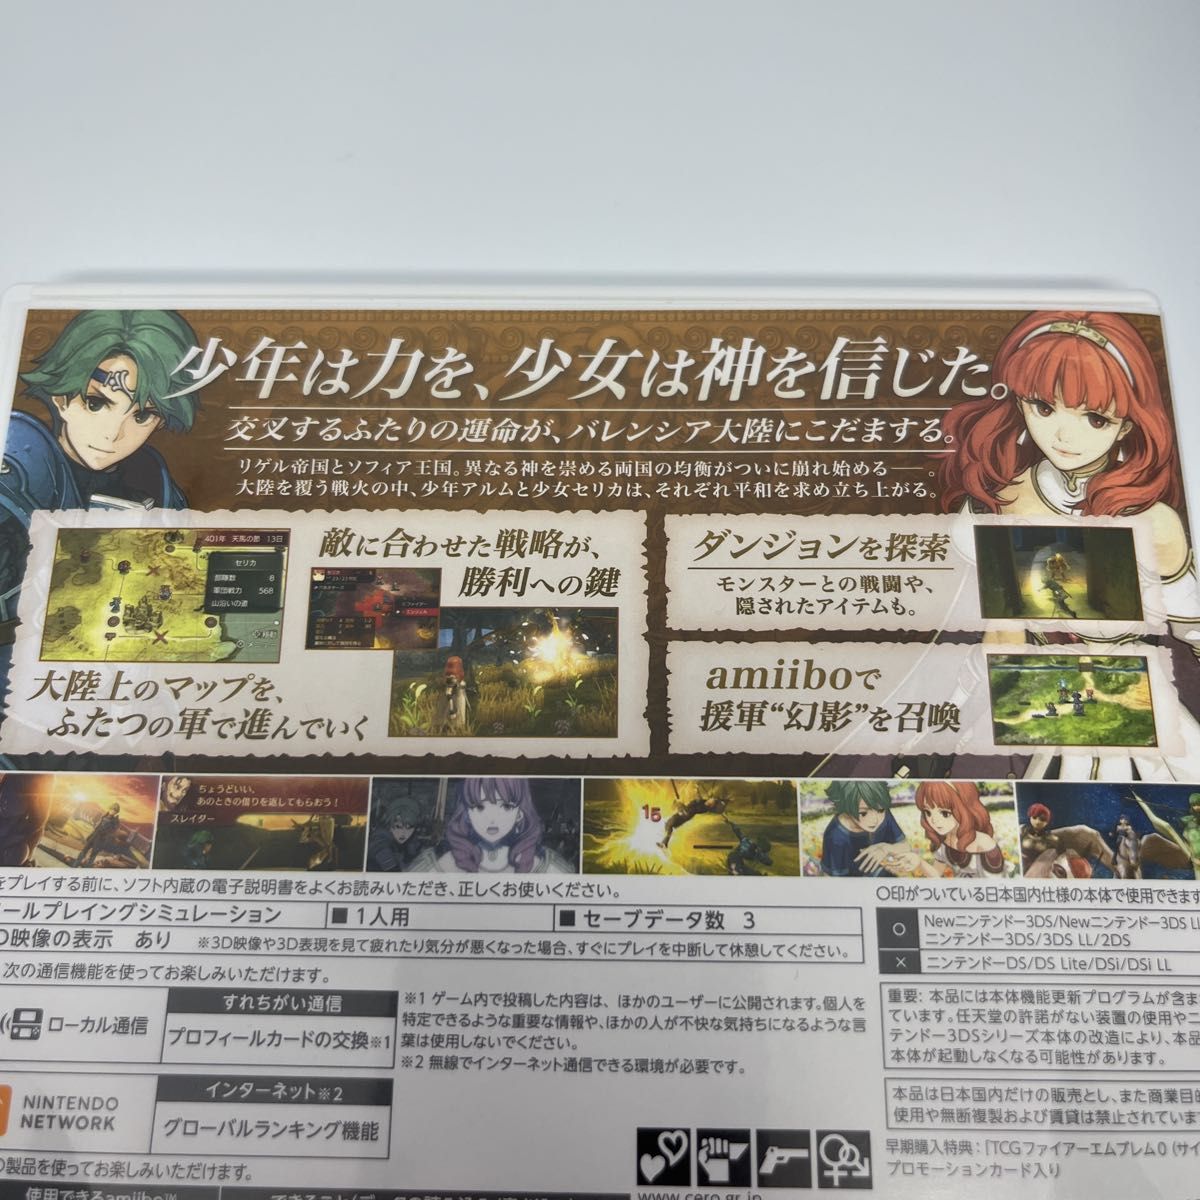 ◆3DS◆ファイアーエムブレム Echoes もうひとりの英雄王 ファイアーエンブレム エコーズ ◆